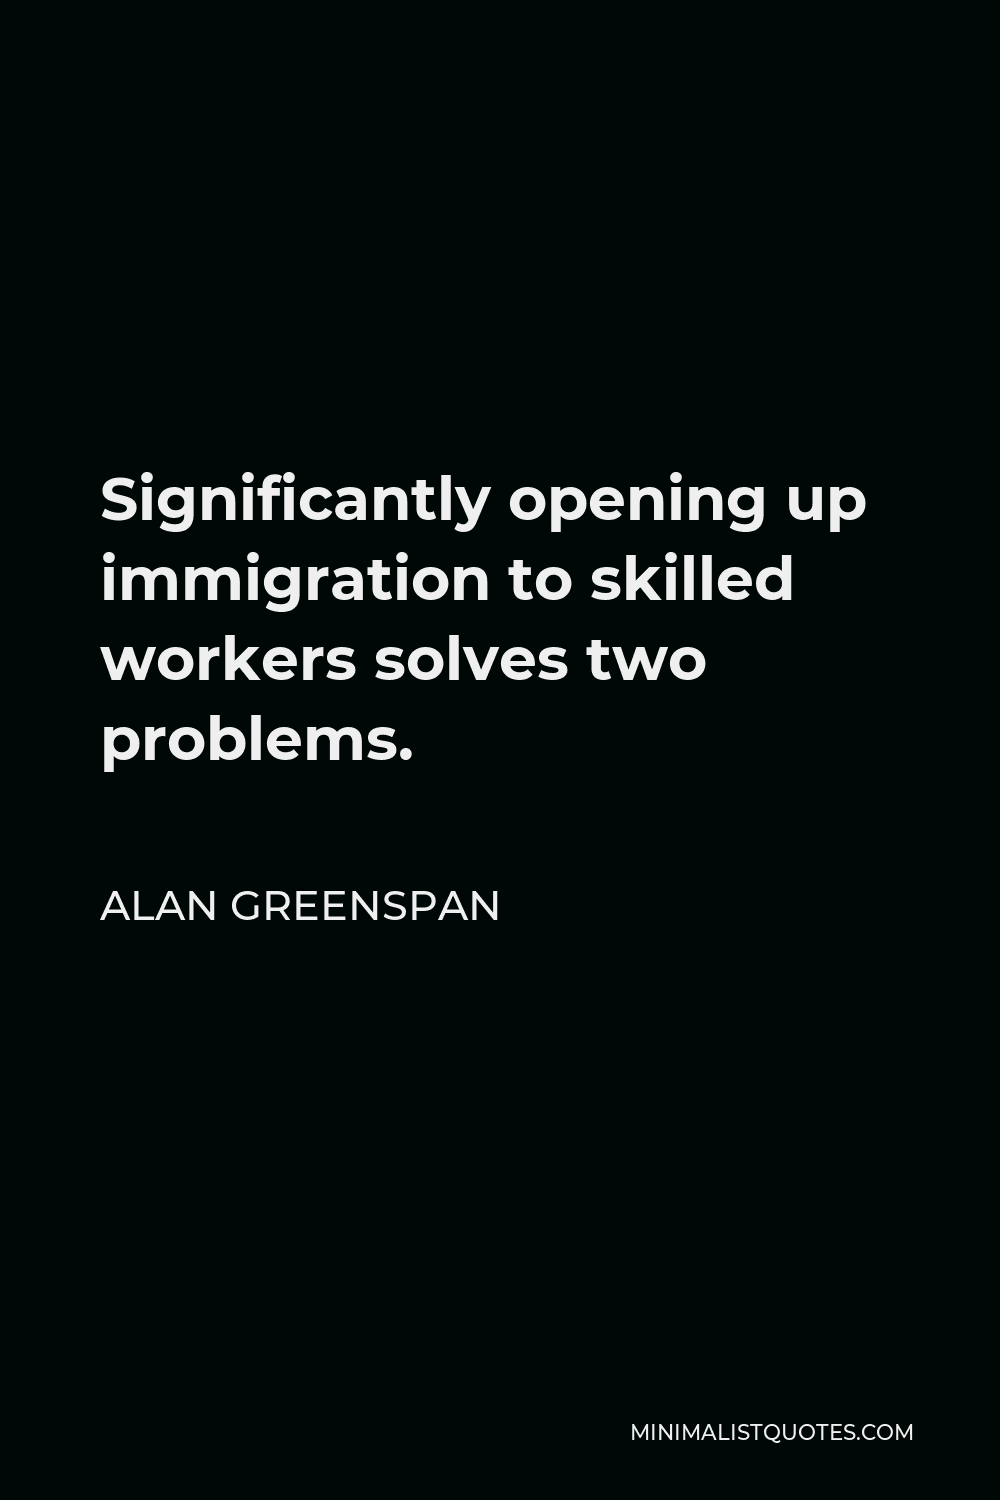 Alan Greenspan Quote - Significantly opening up immigration to skilled workers solves two problems.